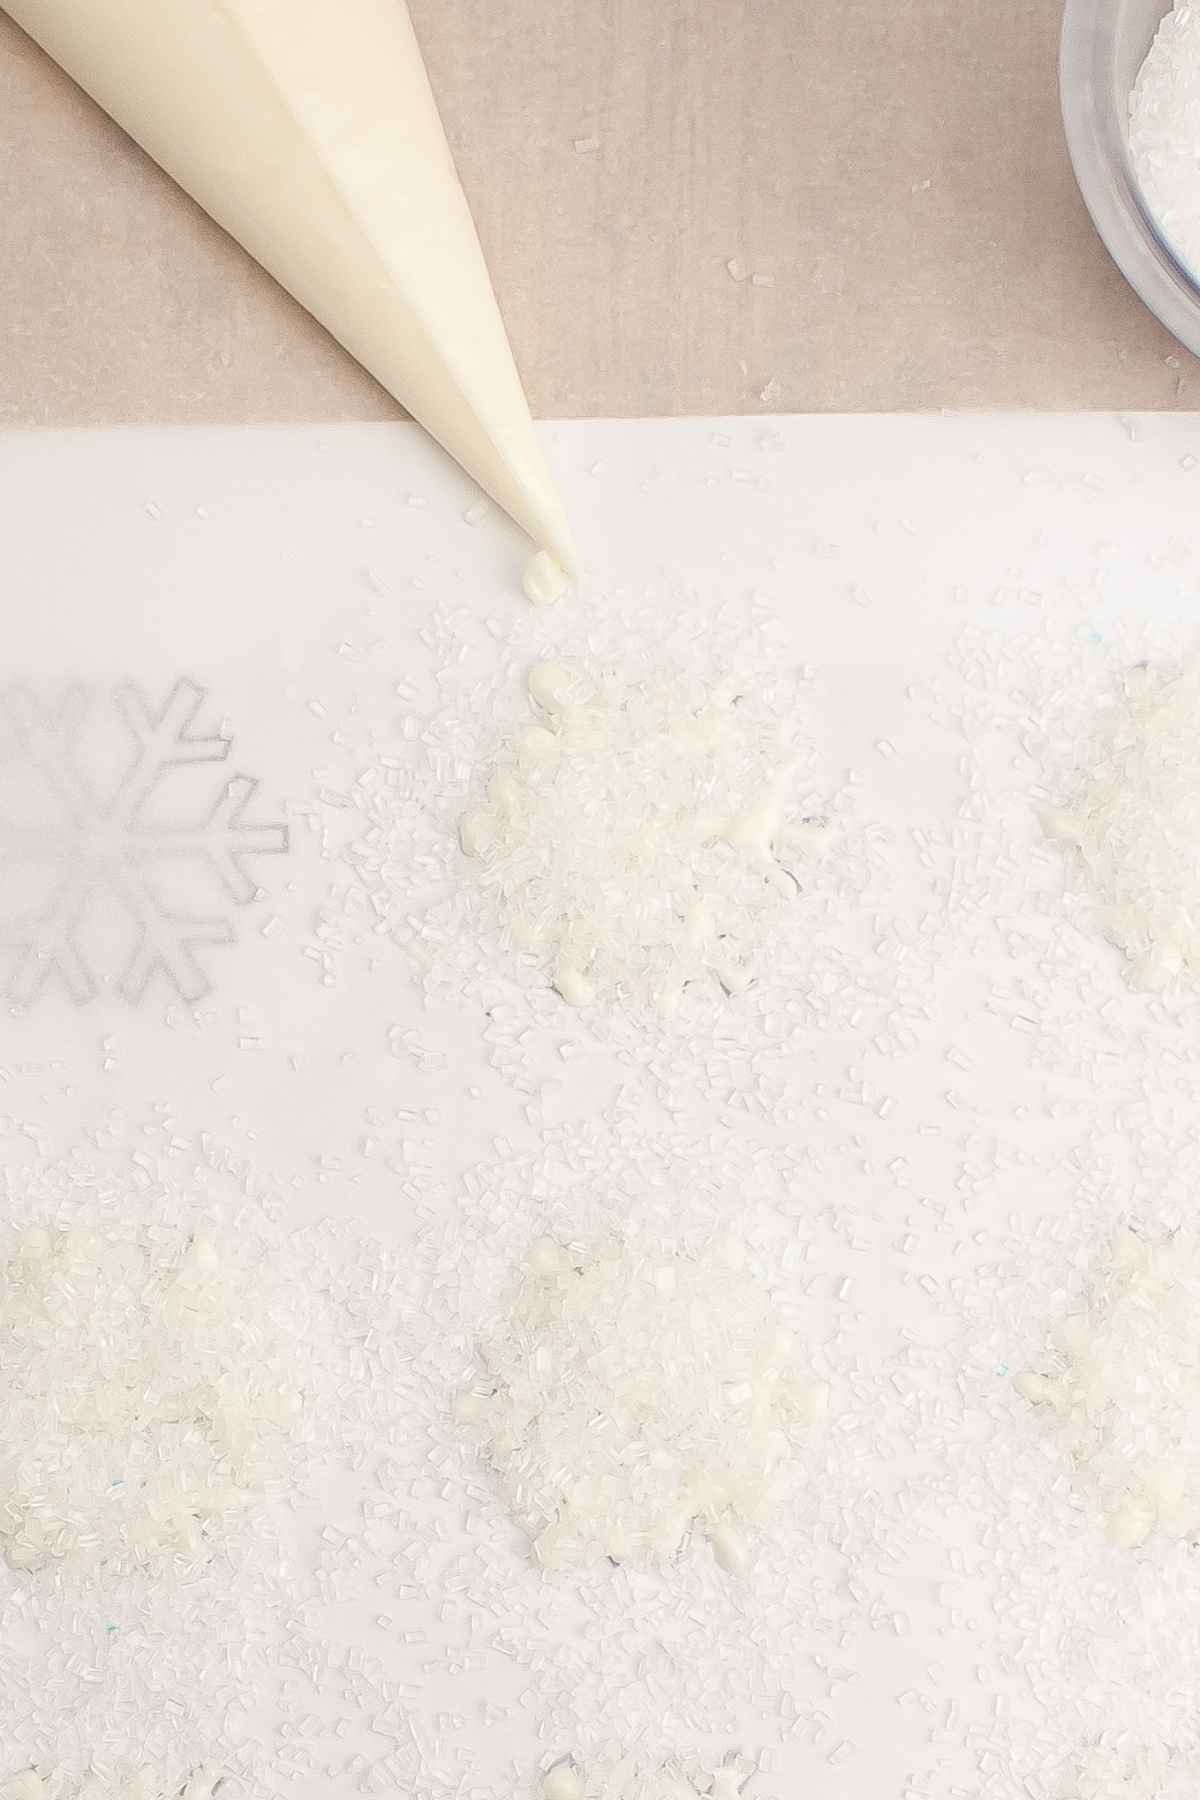 White chocolate stars on parchment paper and sparkly white sugar.